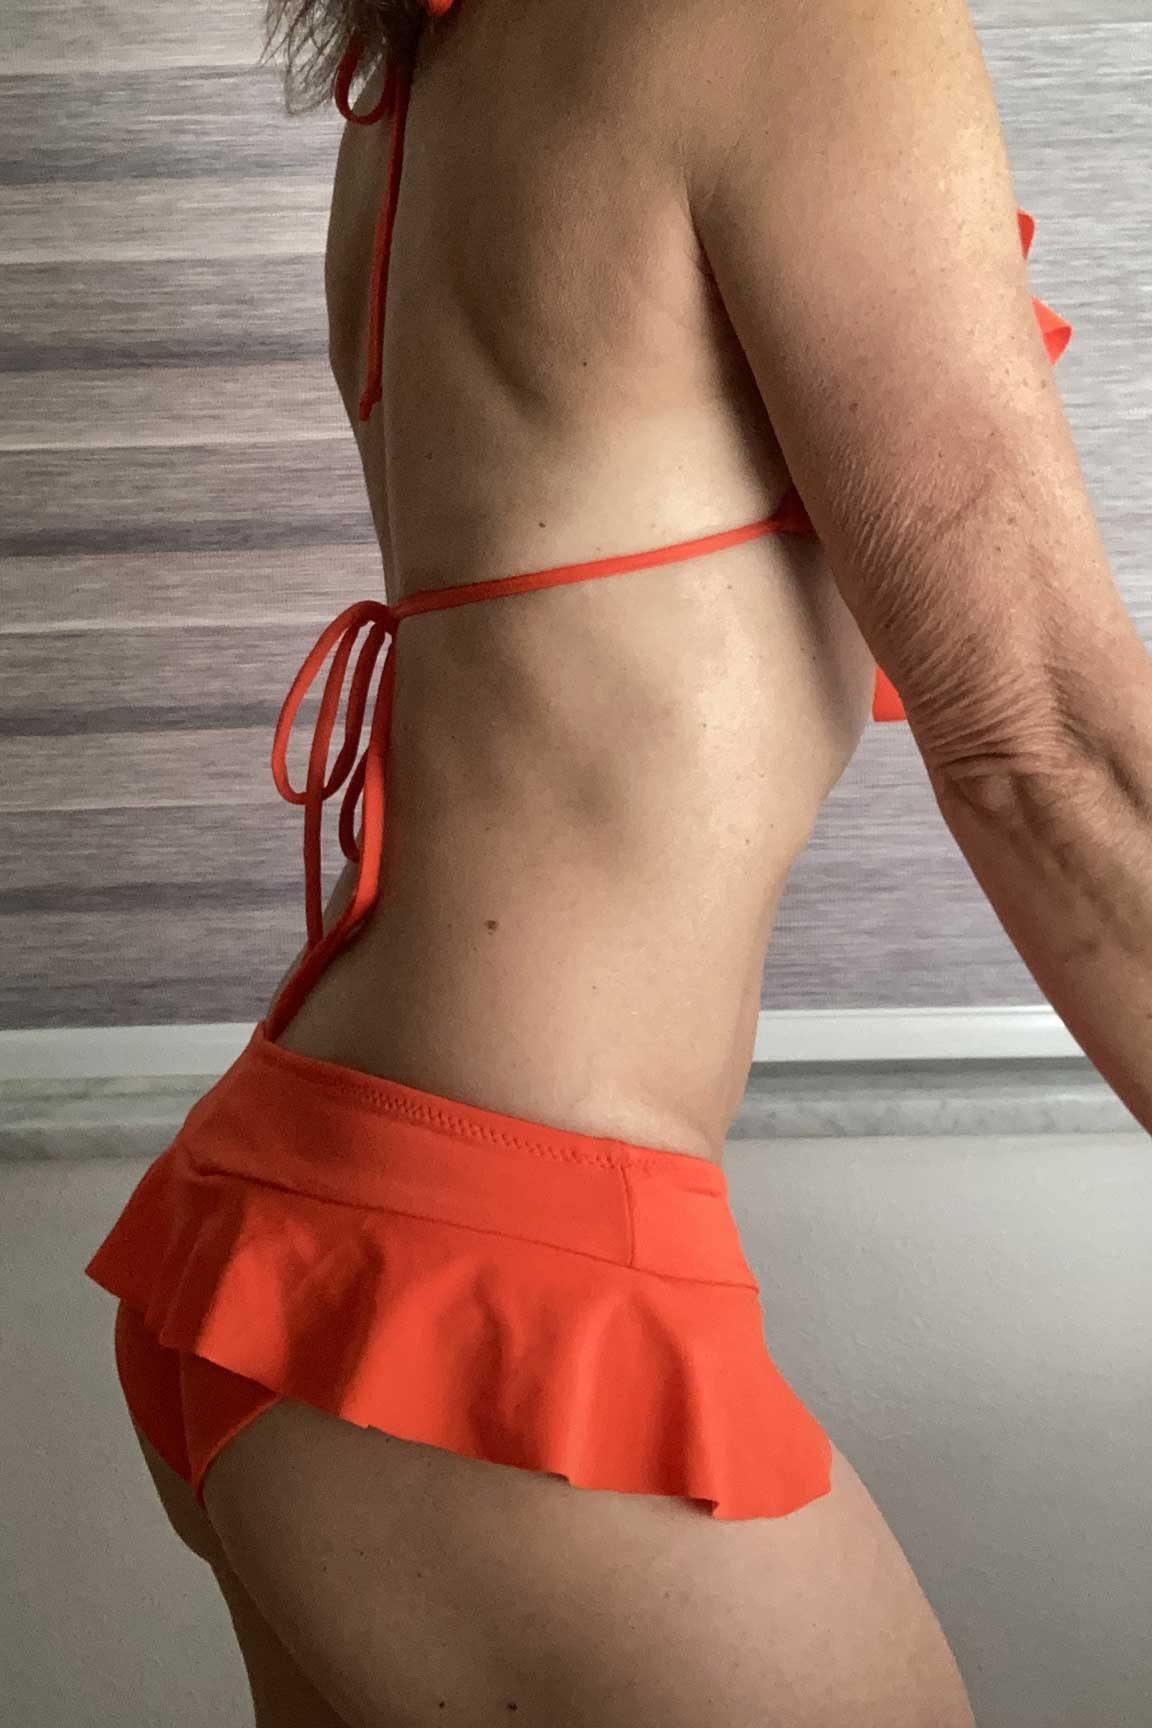 Be poolside ready in this sexy bright orange, adjustable, ruffle bikini top! This bikini comes in a few different colors. Find the one that’s best for you @jillesbikinis 